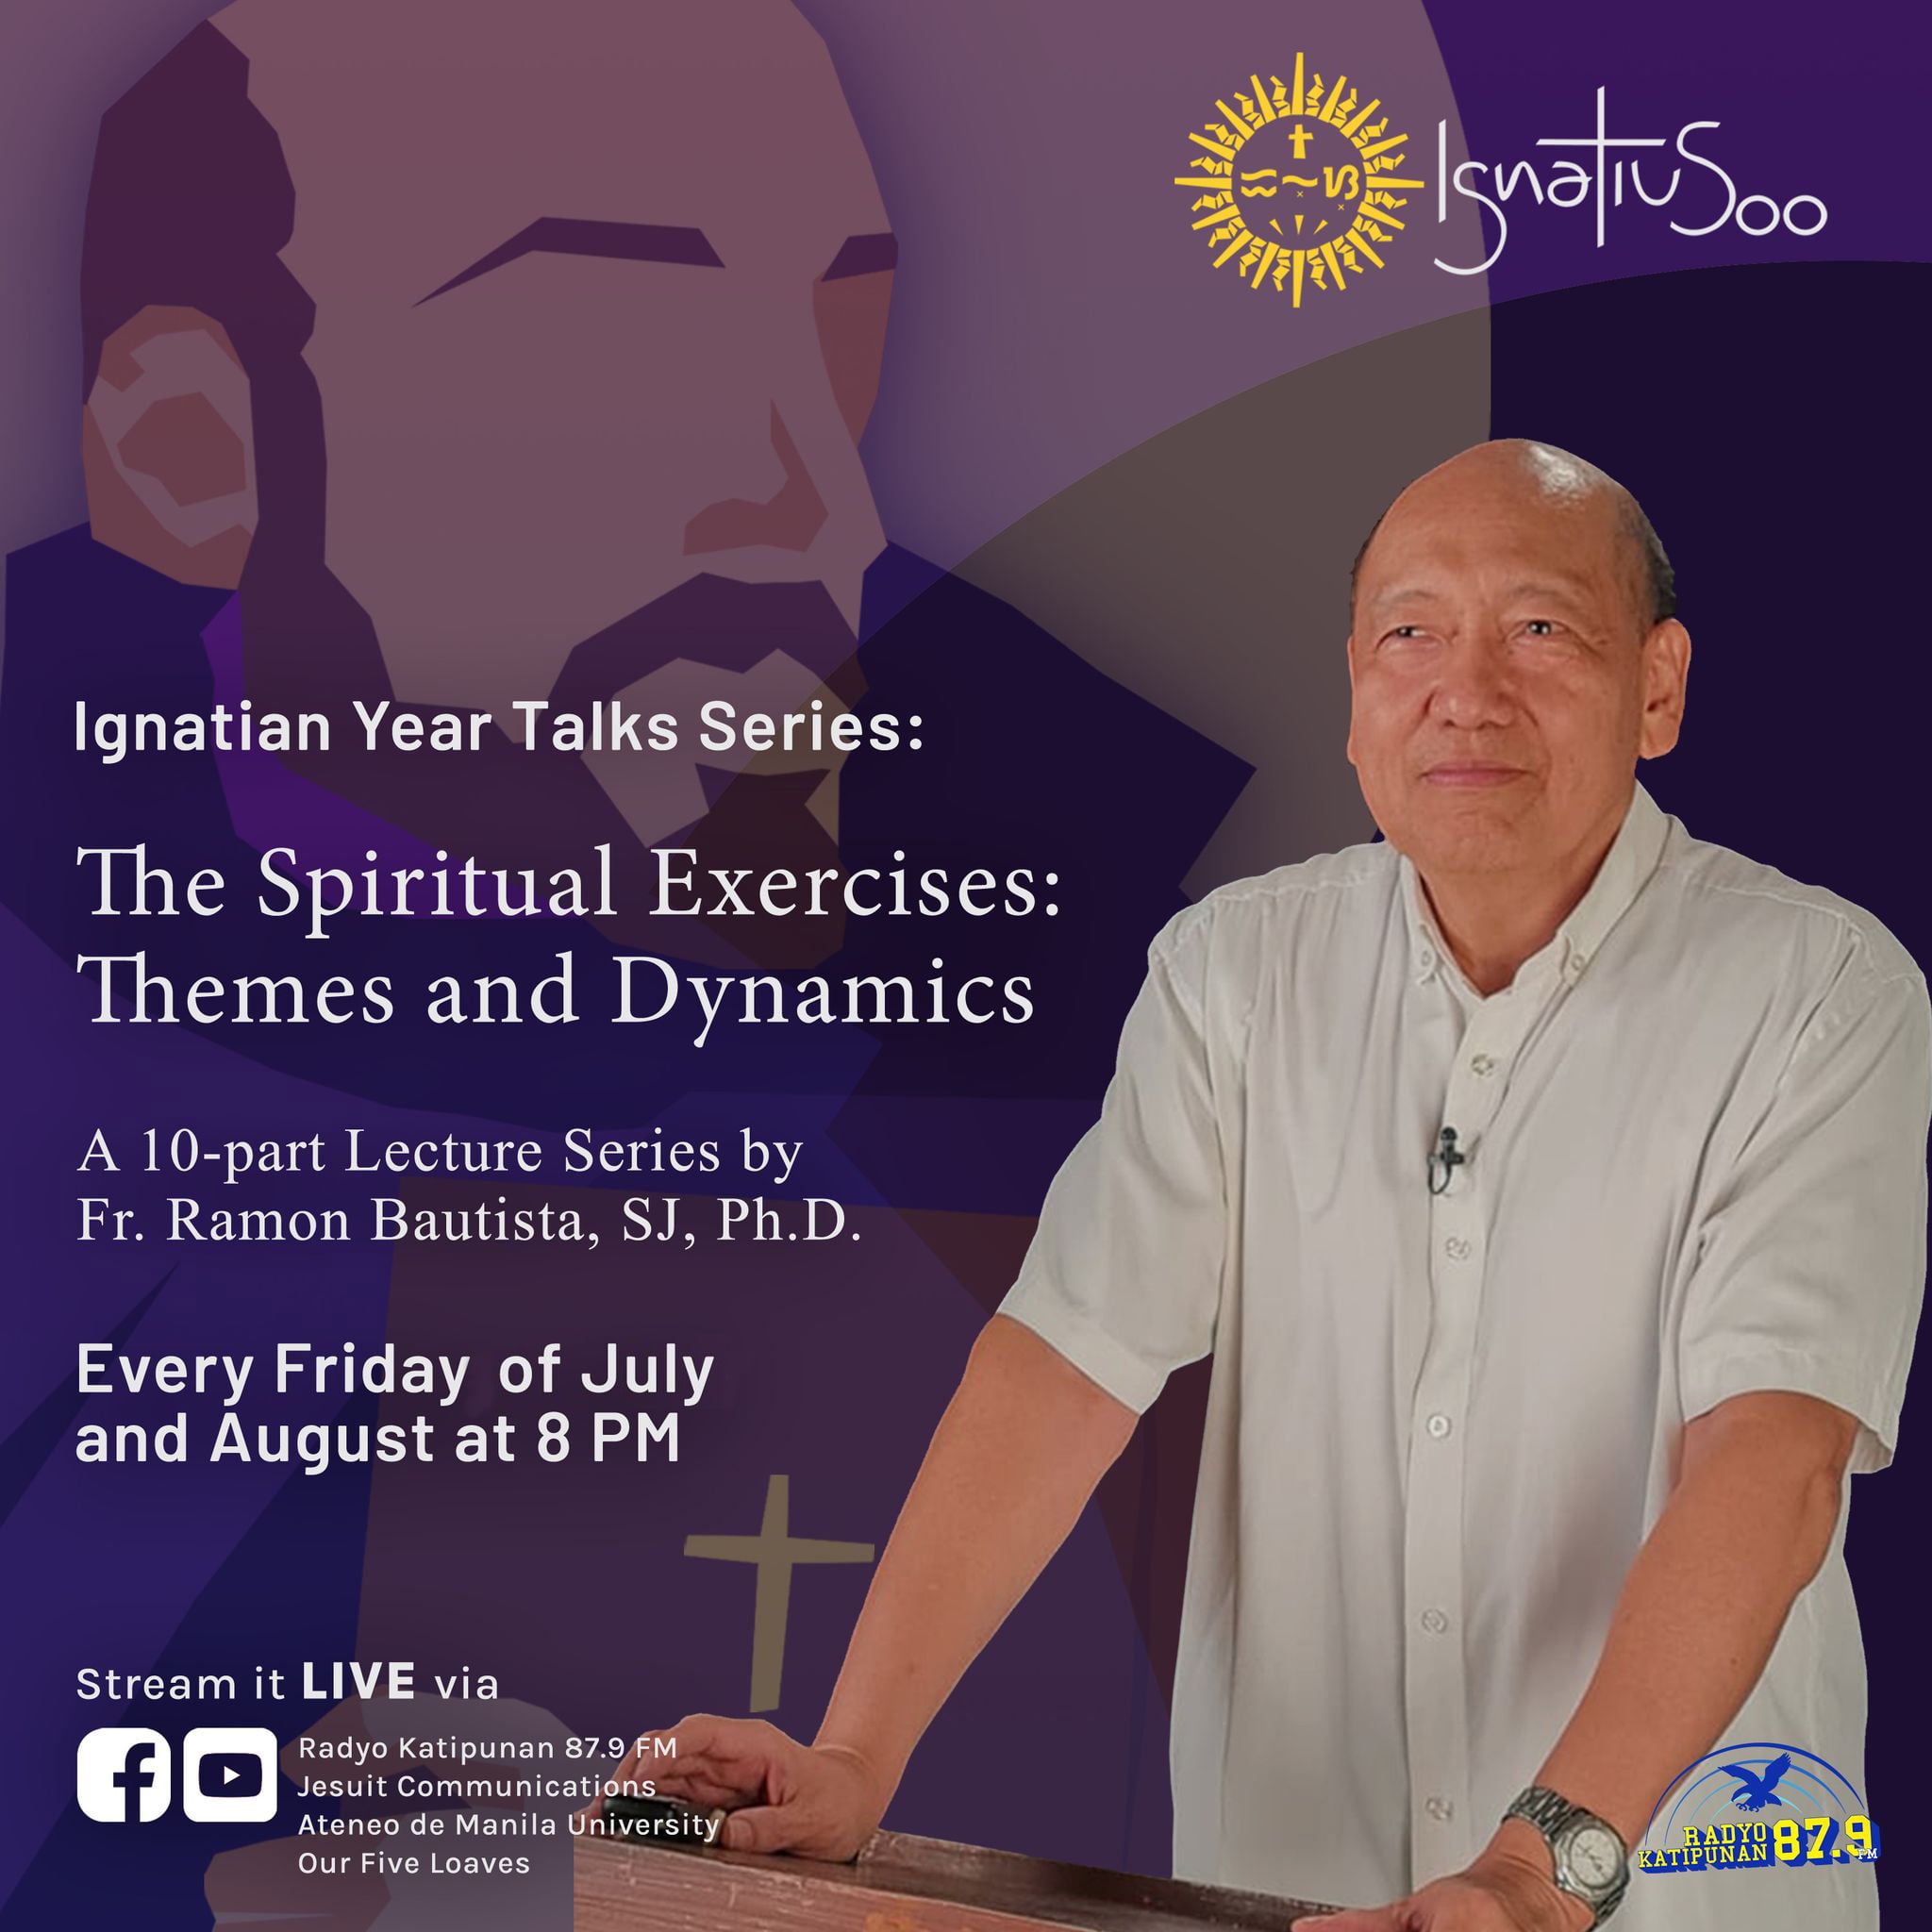 The Spiritual Exercises: Themes and Dynamics (Episode 3) — ‘The Person, Task and Function of the Retreatant’ with Fr. Ramon Bautista, SJ